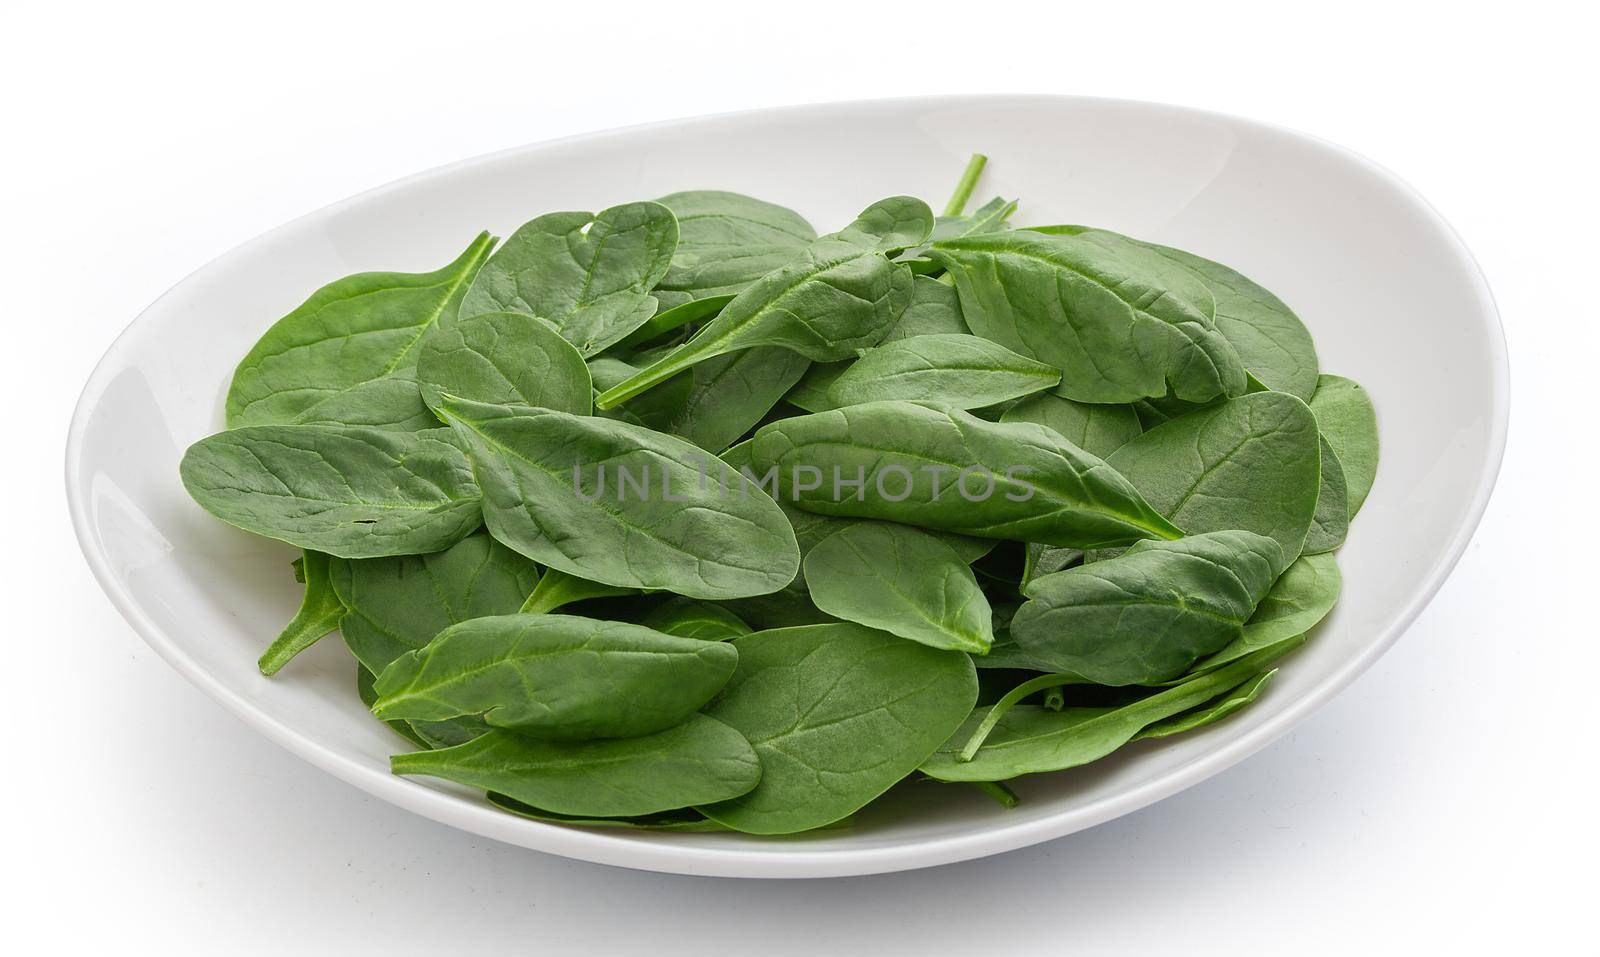 Mound of fresh green spinach in the white bowl